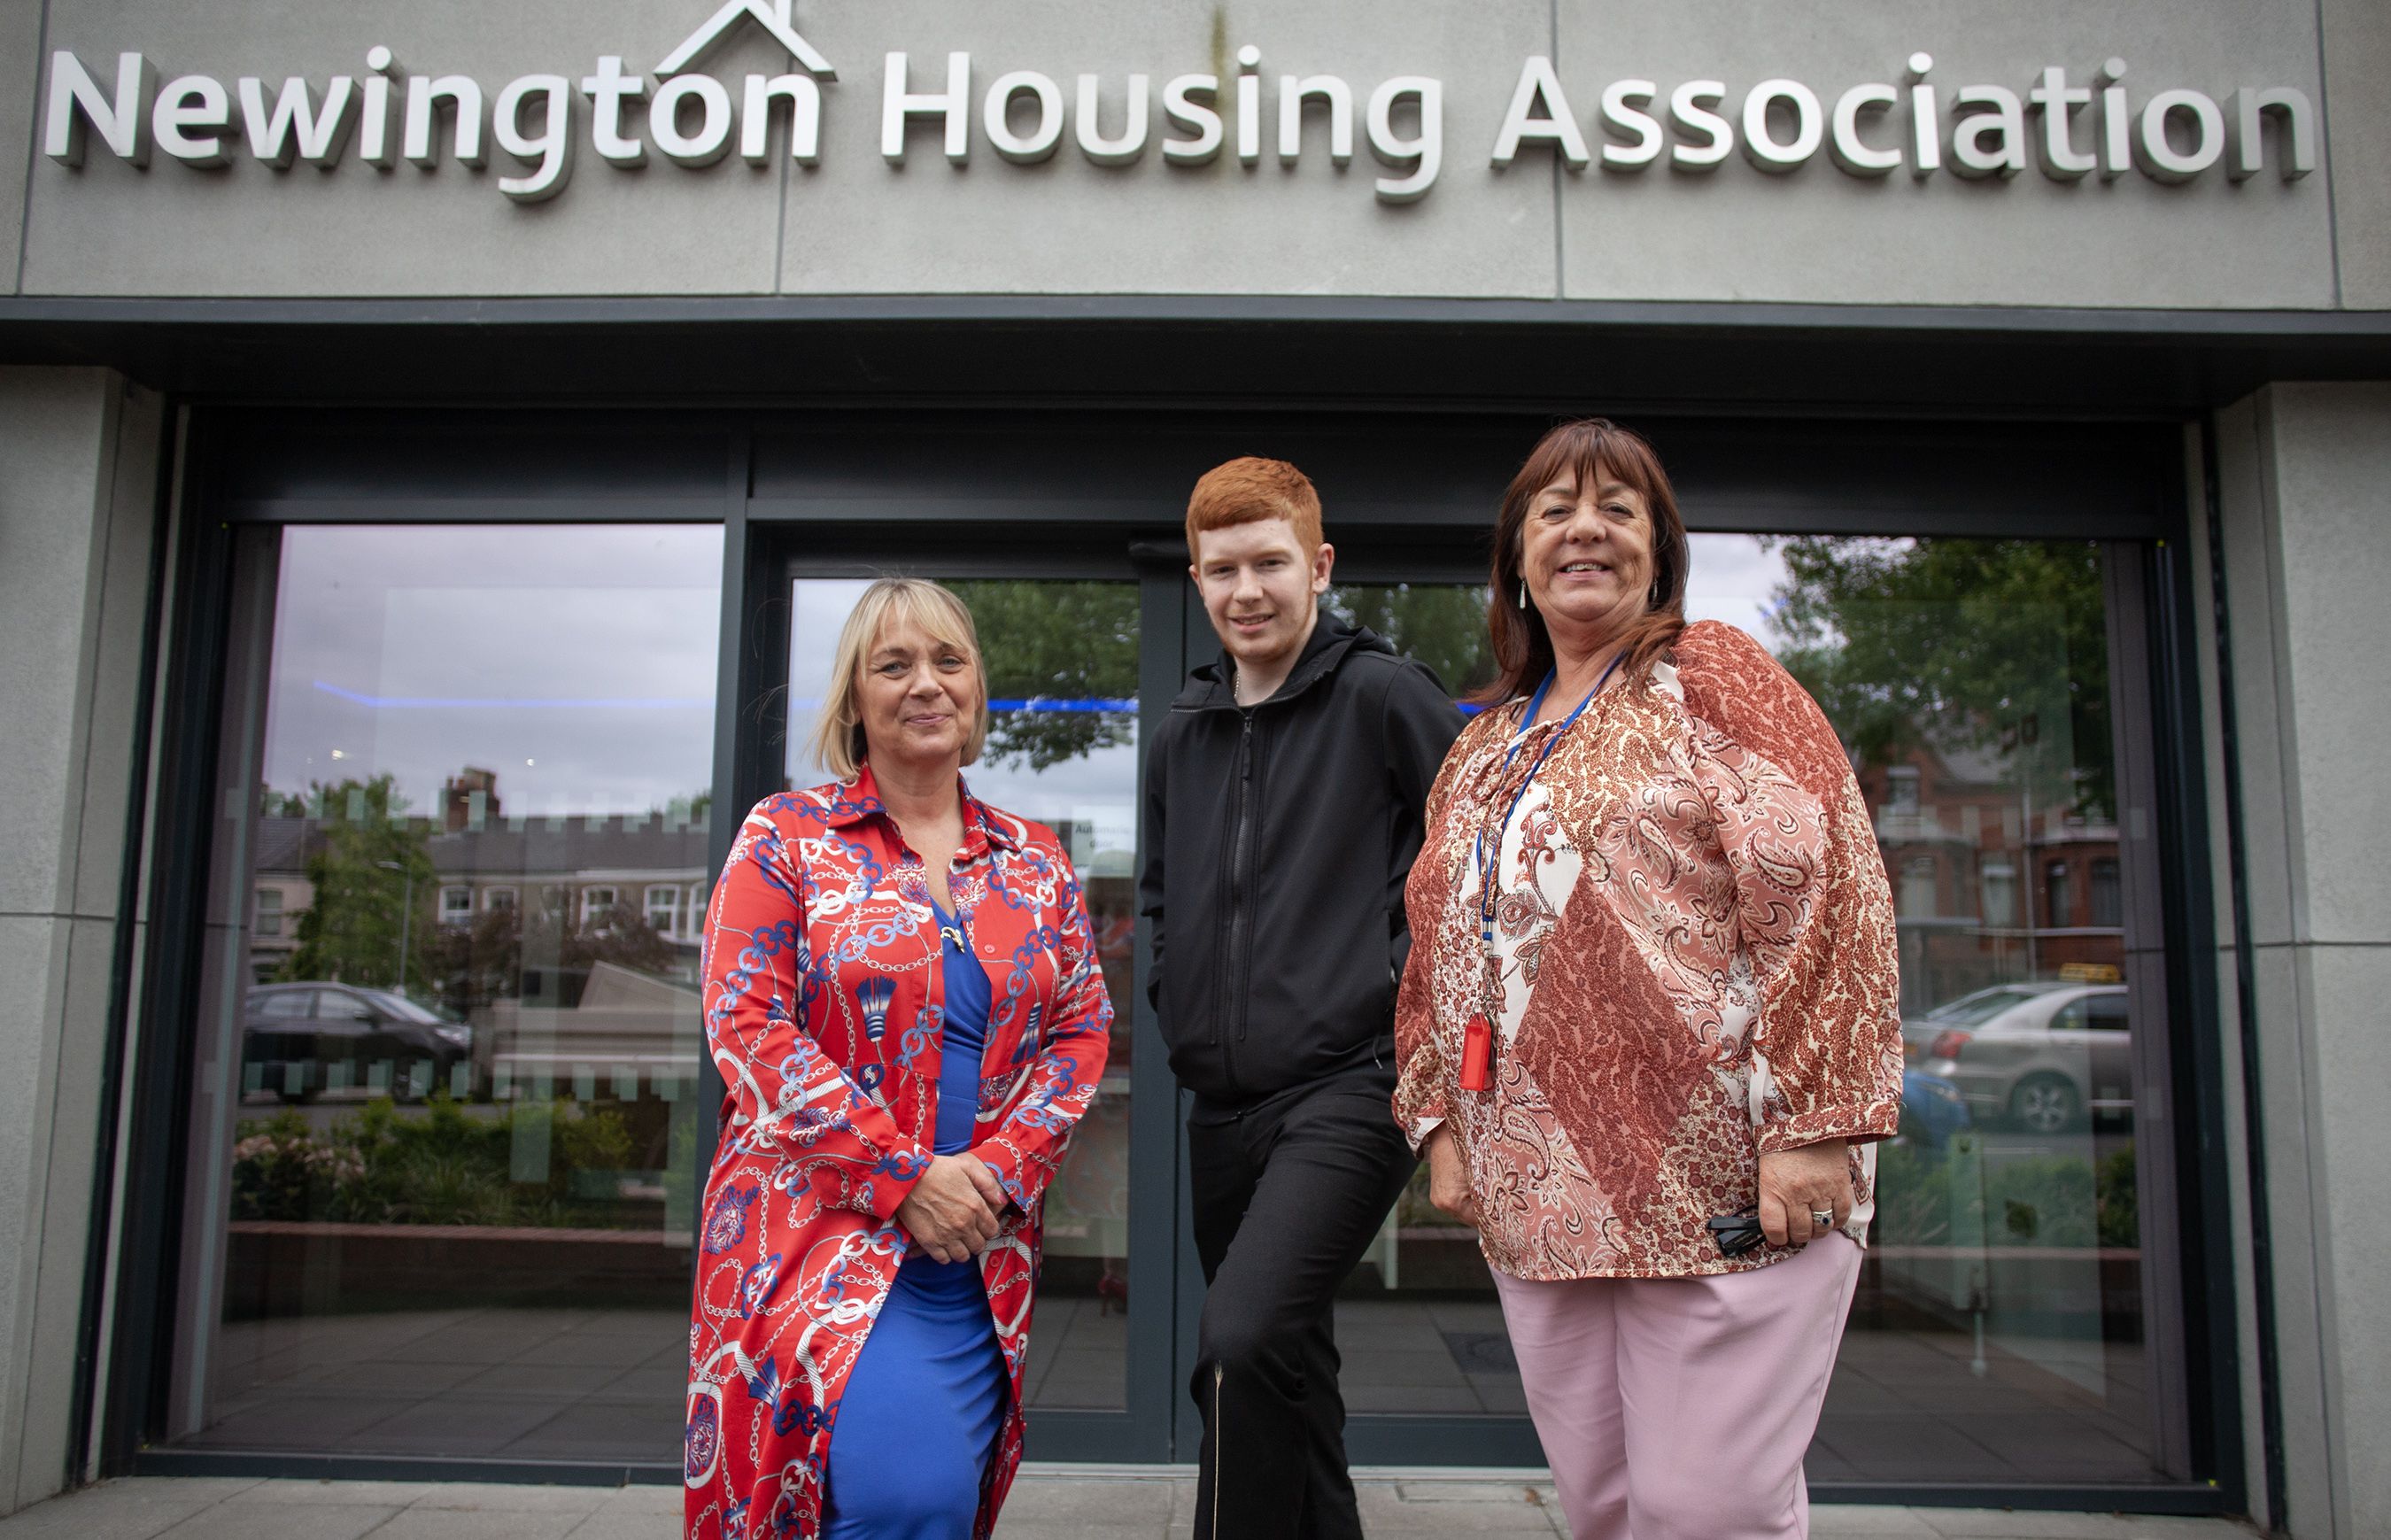 Jacqui Gilmore (Head of Housing and Communities), Aodhan Thompson (Housing Apprentice) and Sadie Reid (Community Engagement Officer) from Newington Housing Association